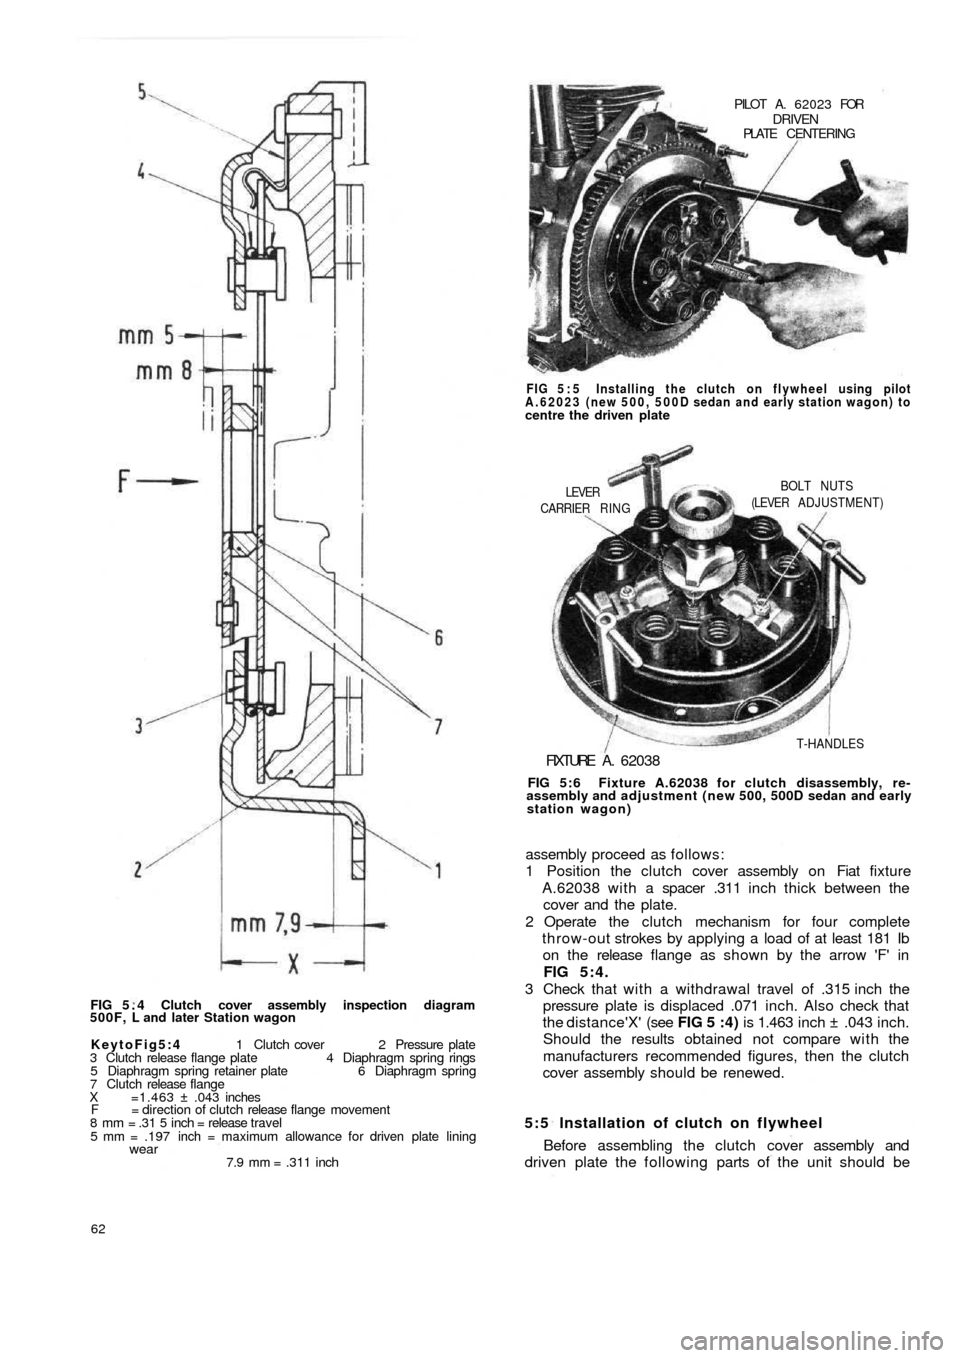 FIAT 500 1957 1.G Workshop Manual FIG 5 . 4  Clutch cover assembly inspection diagram
500F, L and later Station wagon
KeytoFig5:4 1 Clutch cover 2 Pressure plate
3 Clutch release flange plate 4 Diaphragm spring rings
5 Diaphragm sprin